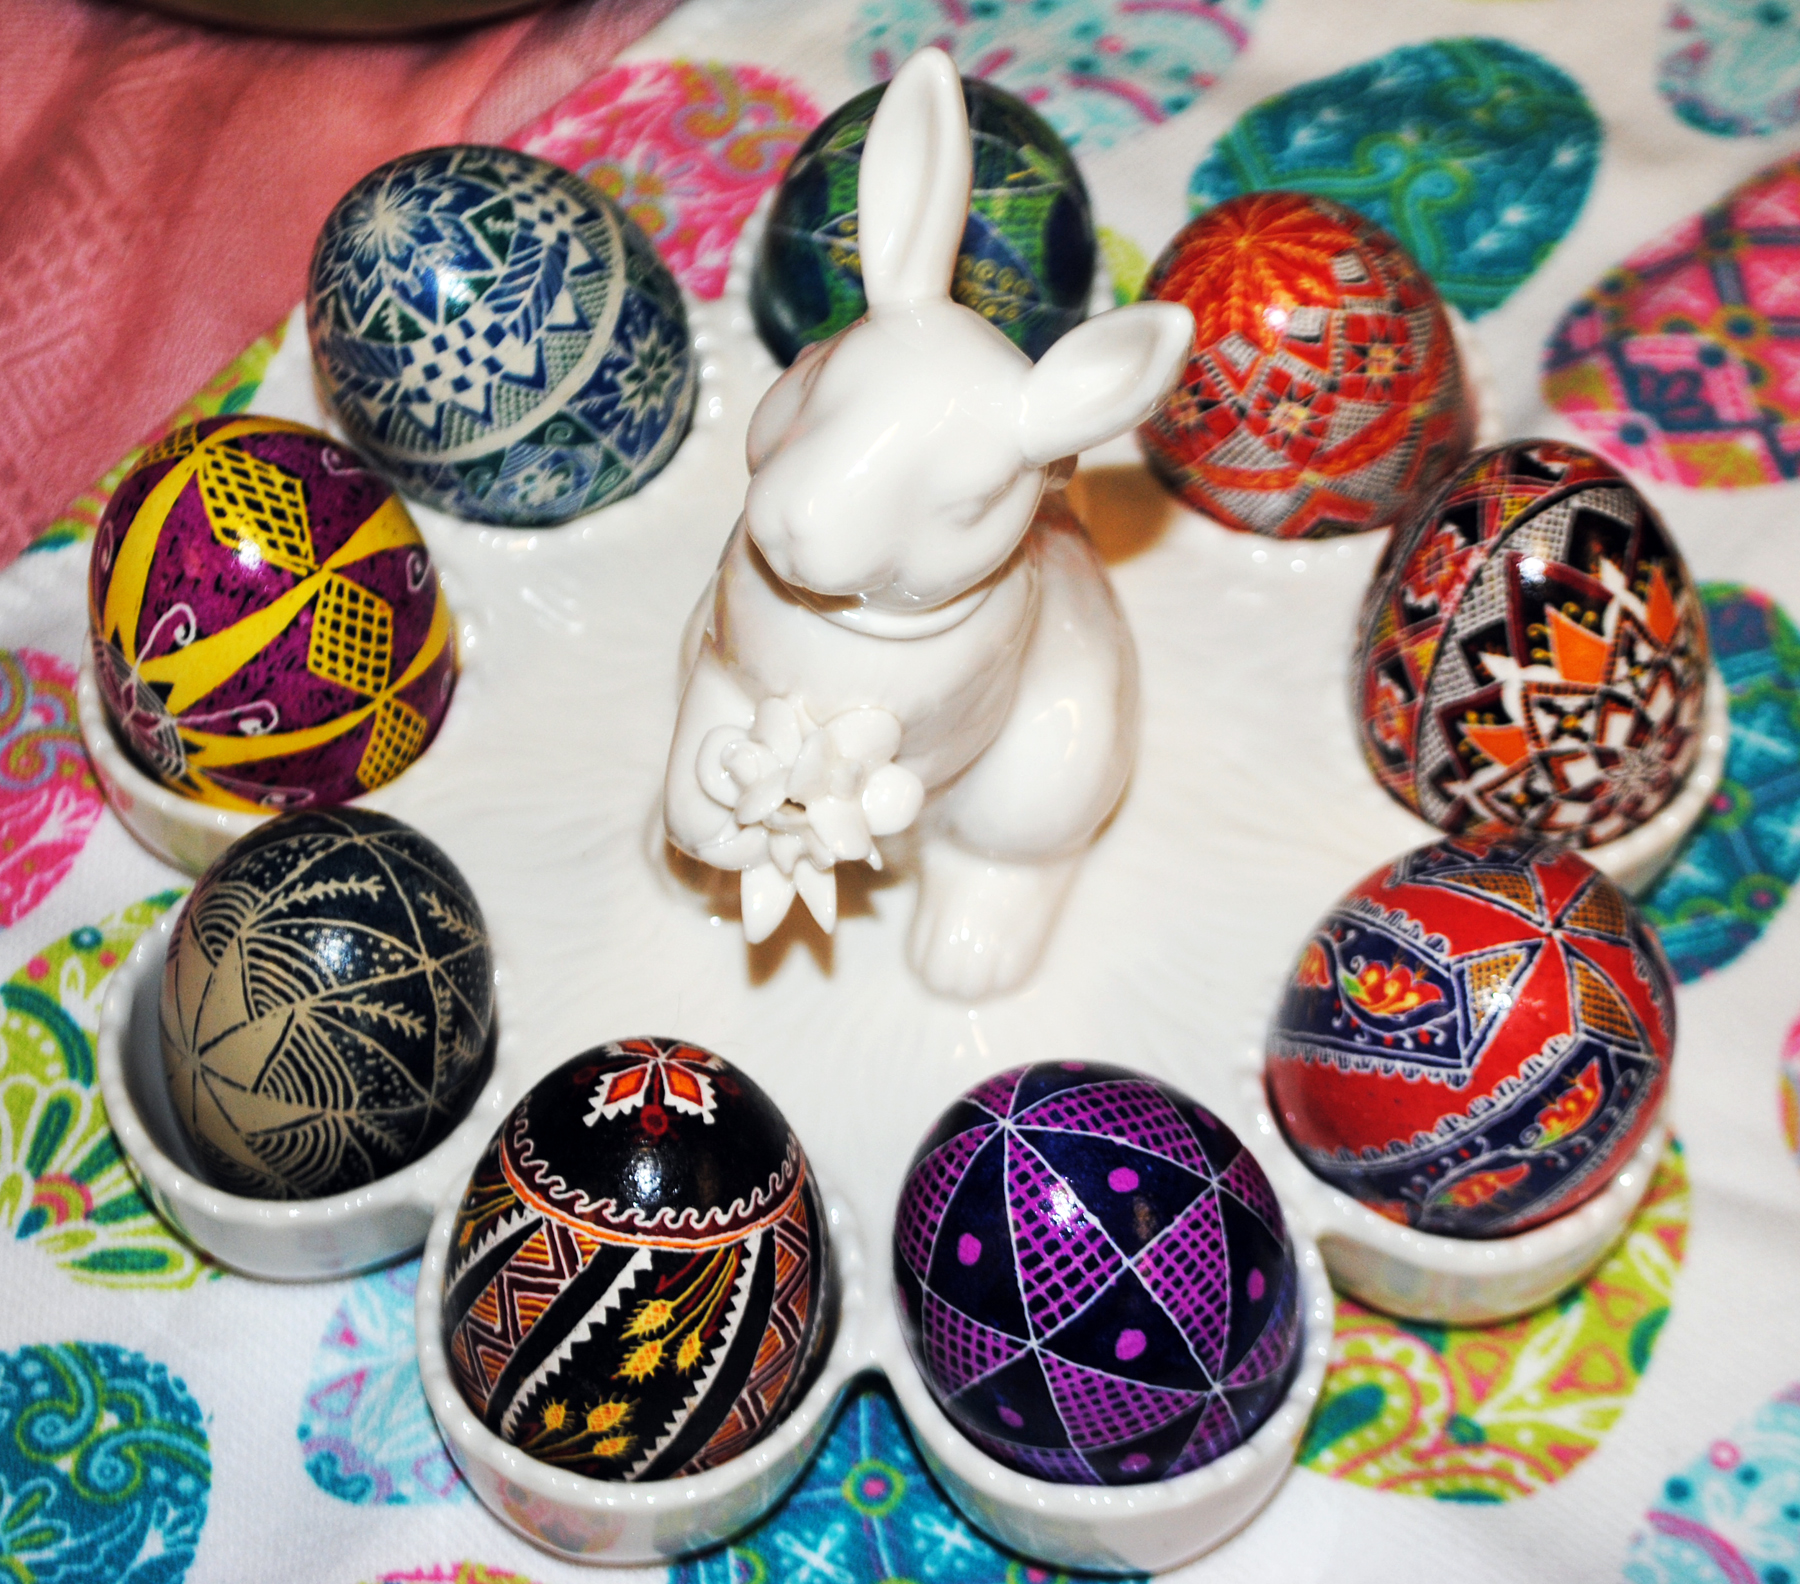 Pysanky dyed eggs